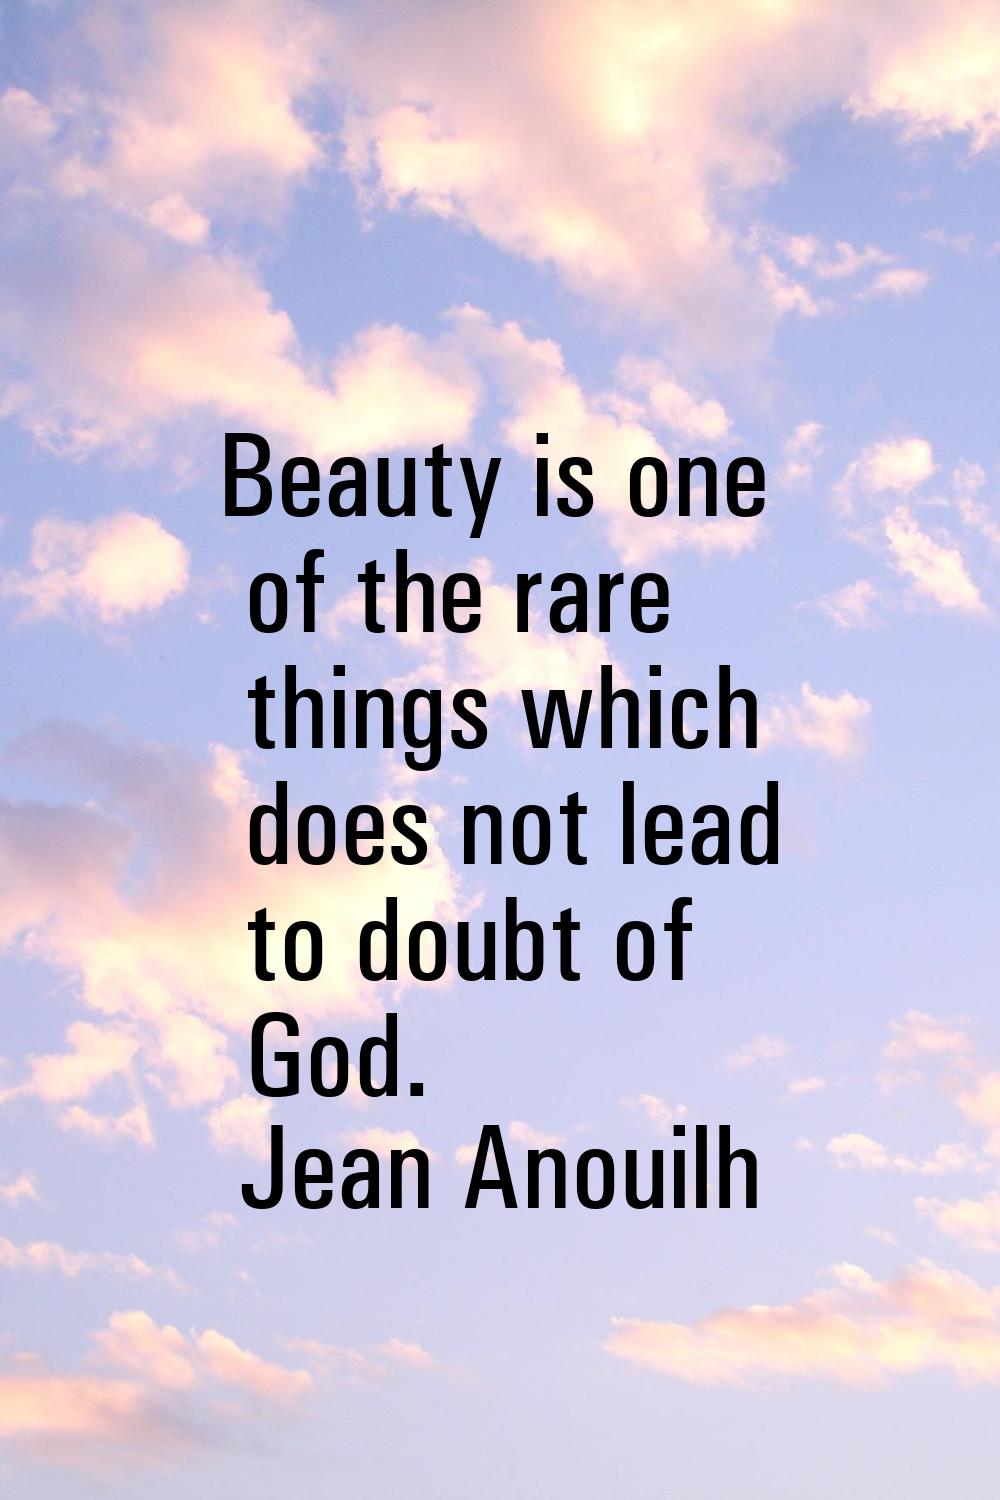 Beauty is one of the rare things which does not lead to doubt of God.